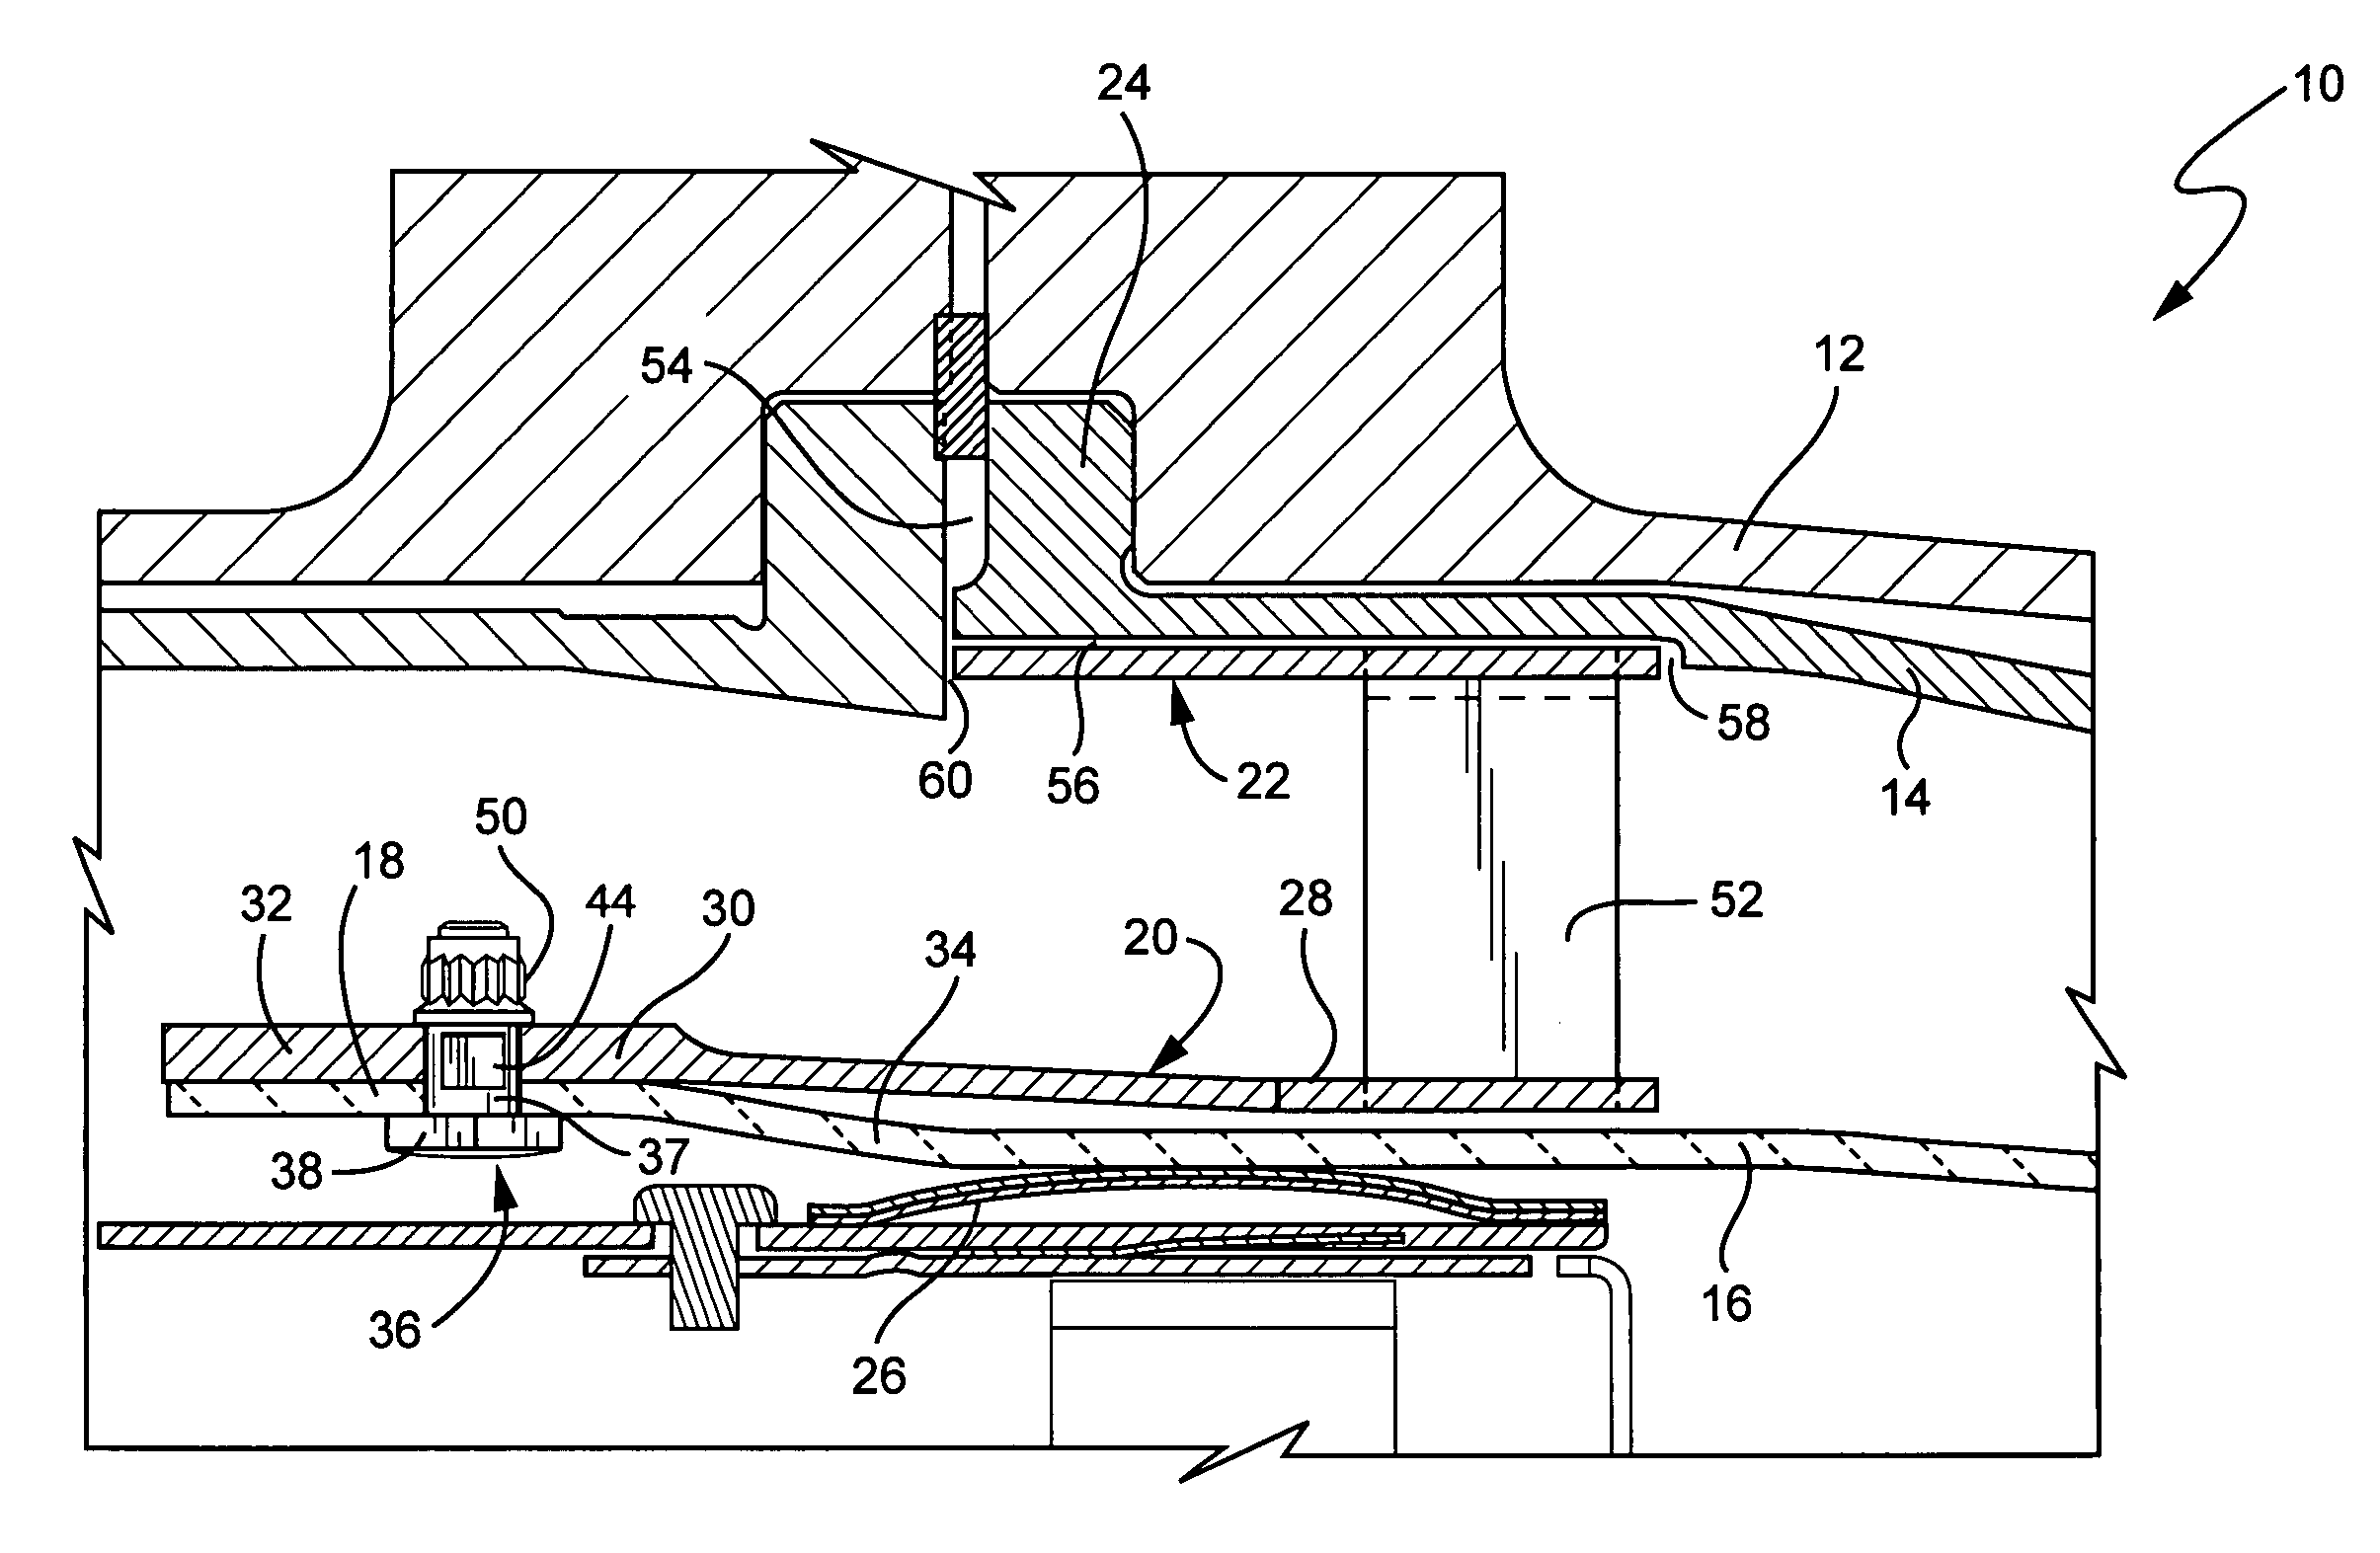 Bolting configuration for joining ceramic combustor liner to metal mounting attachments